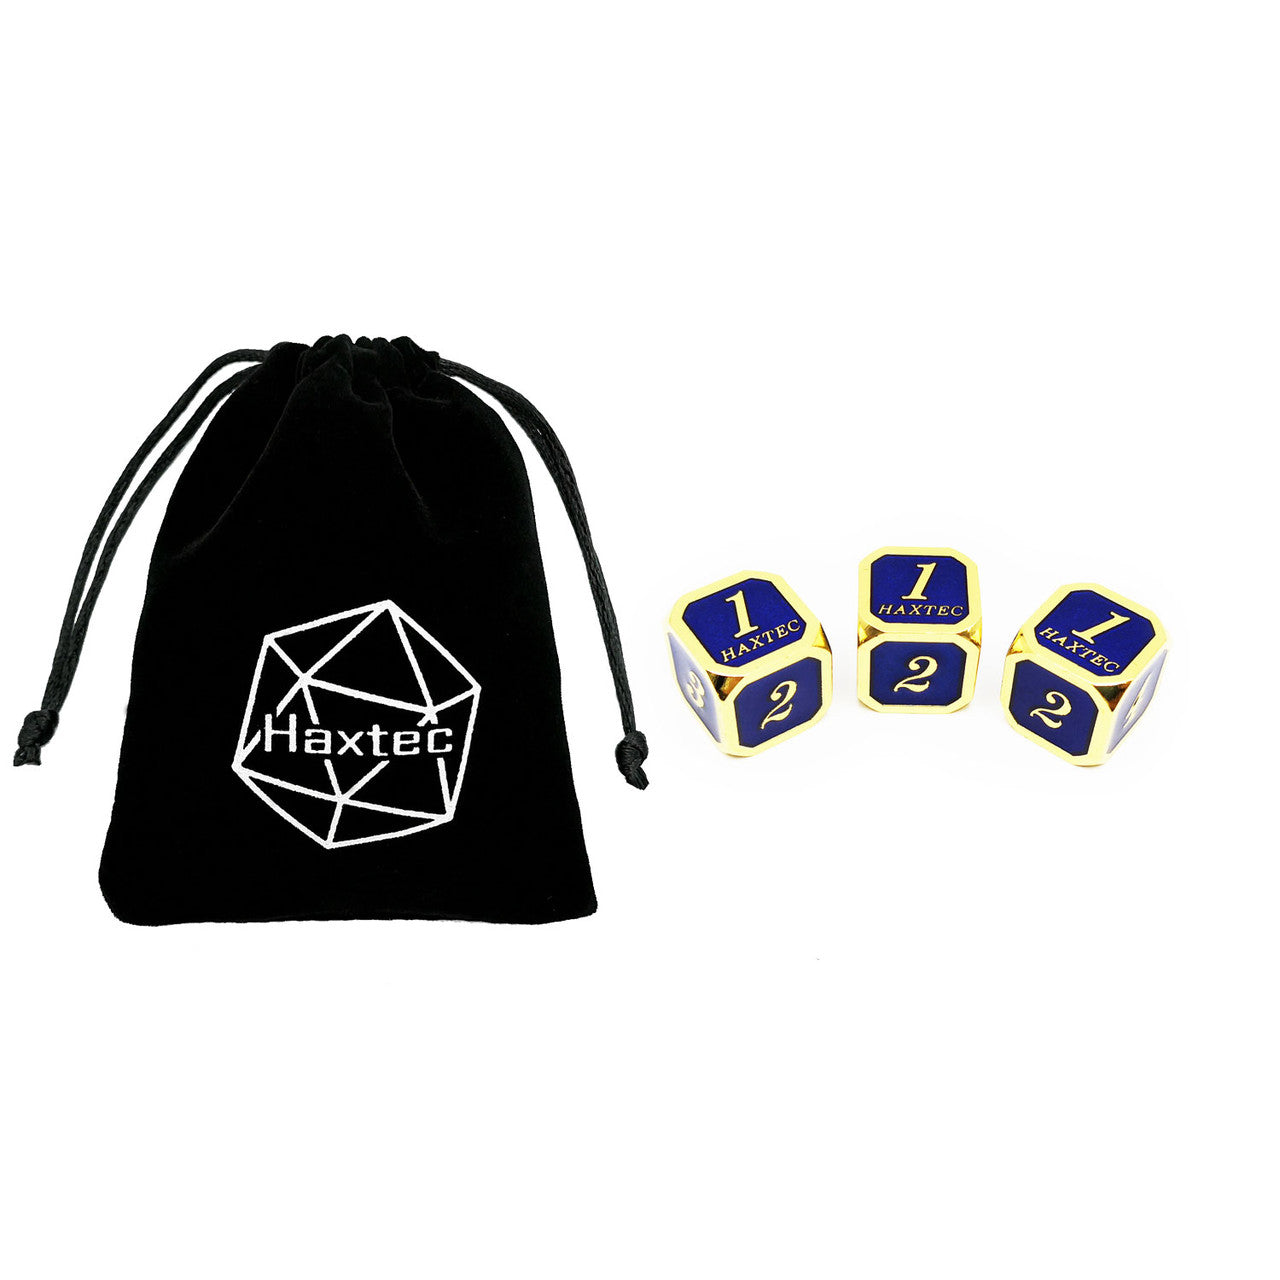 Haxtec D6 dice gold navy blue with bag